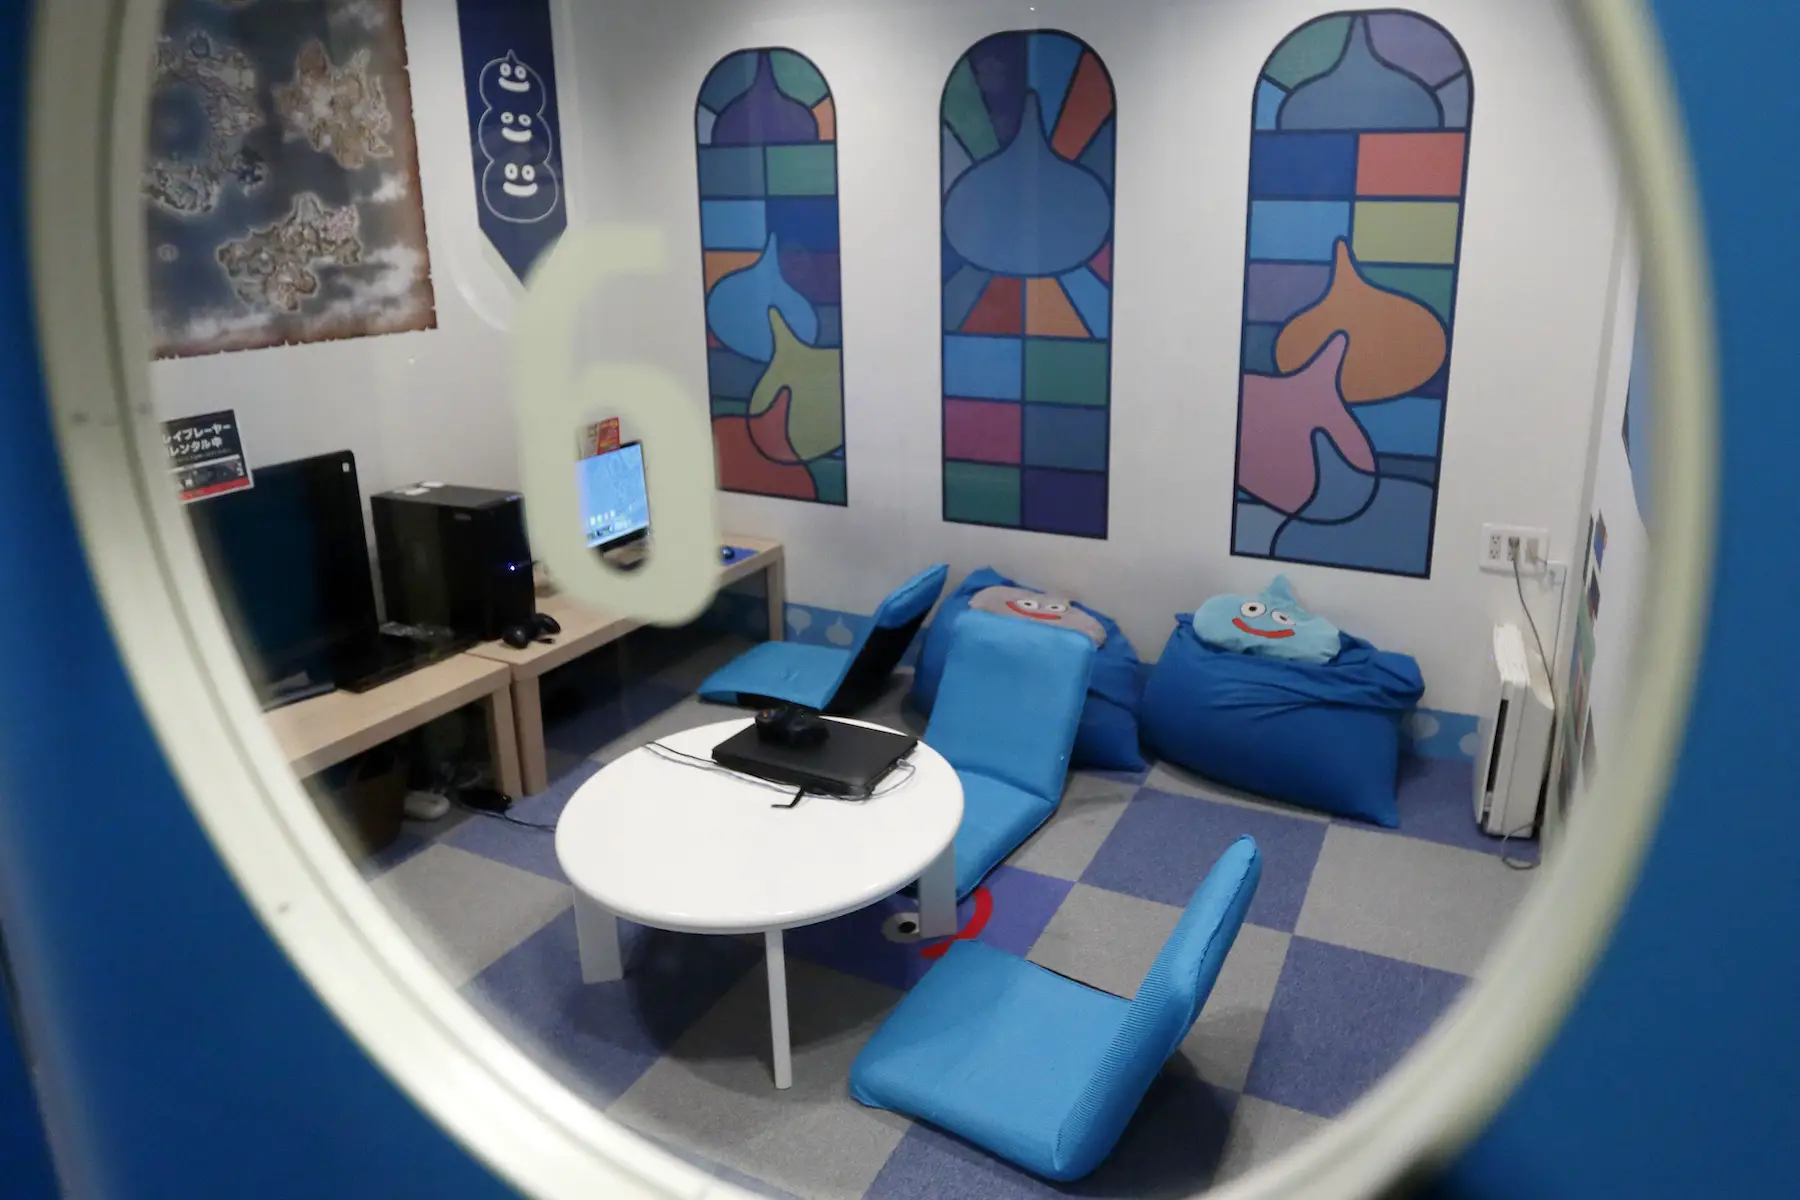 A rentable room designed for families at a Tokyo internet cafe, the room is bright blue with bean bag chairs and several computers